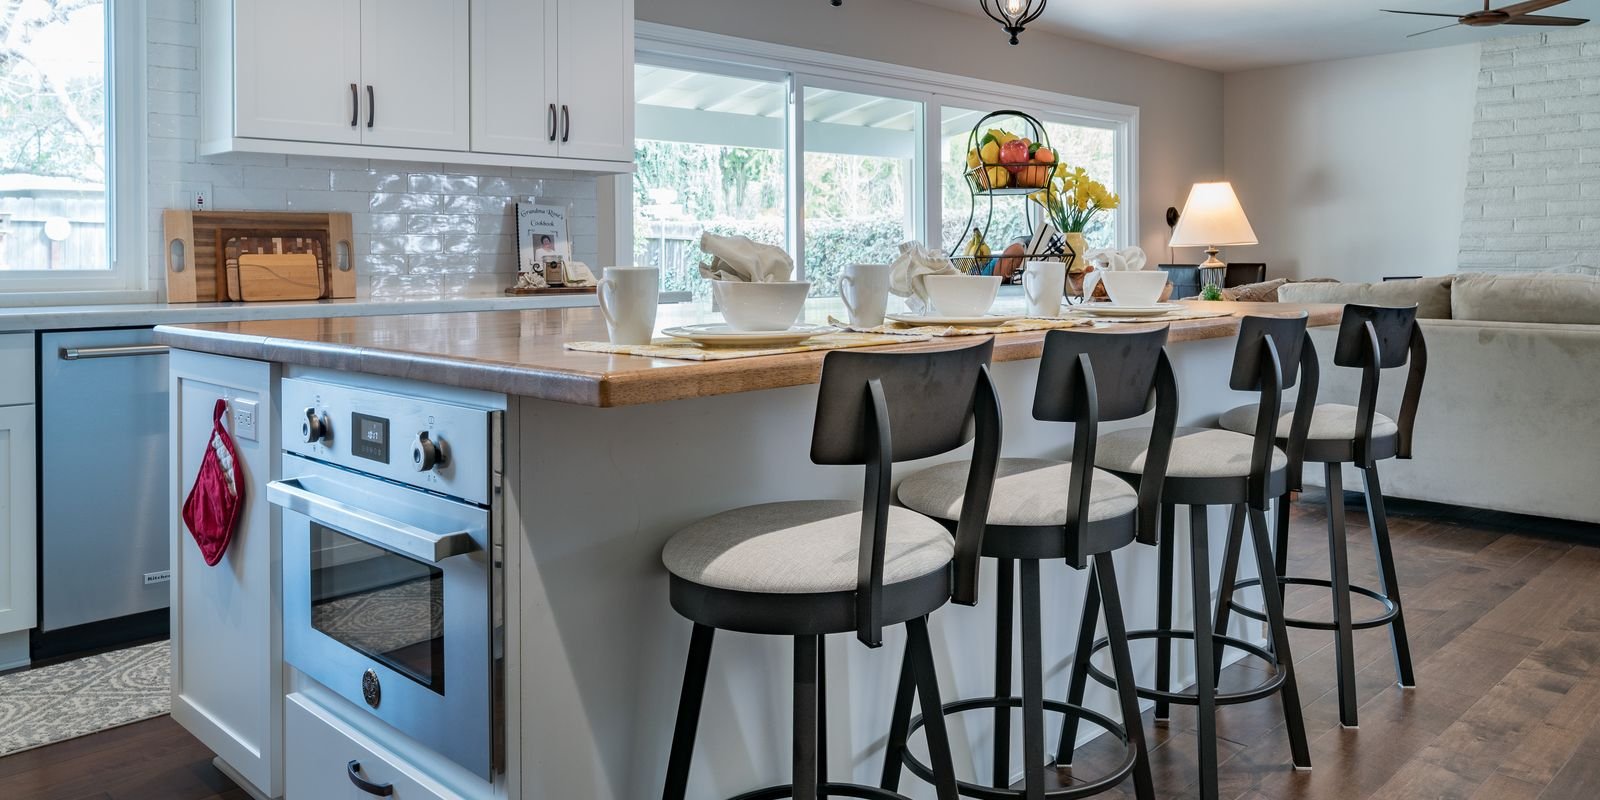 fresno kitchen remodel with barstool chairs at island